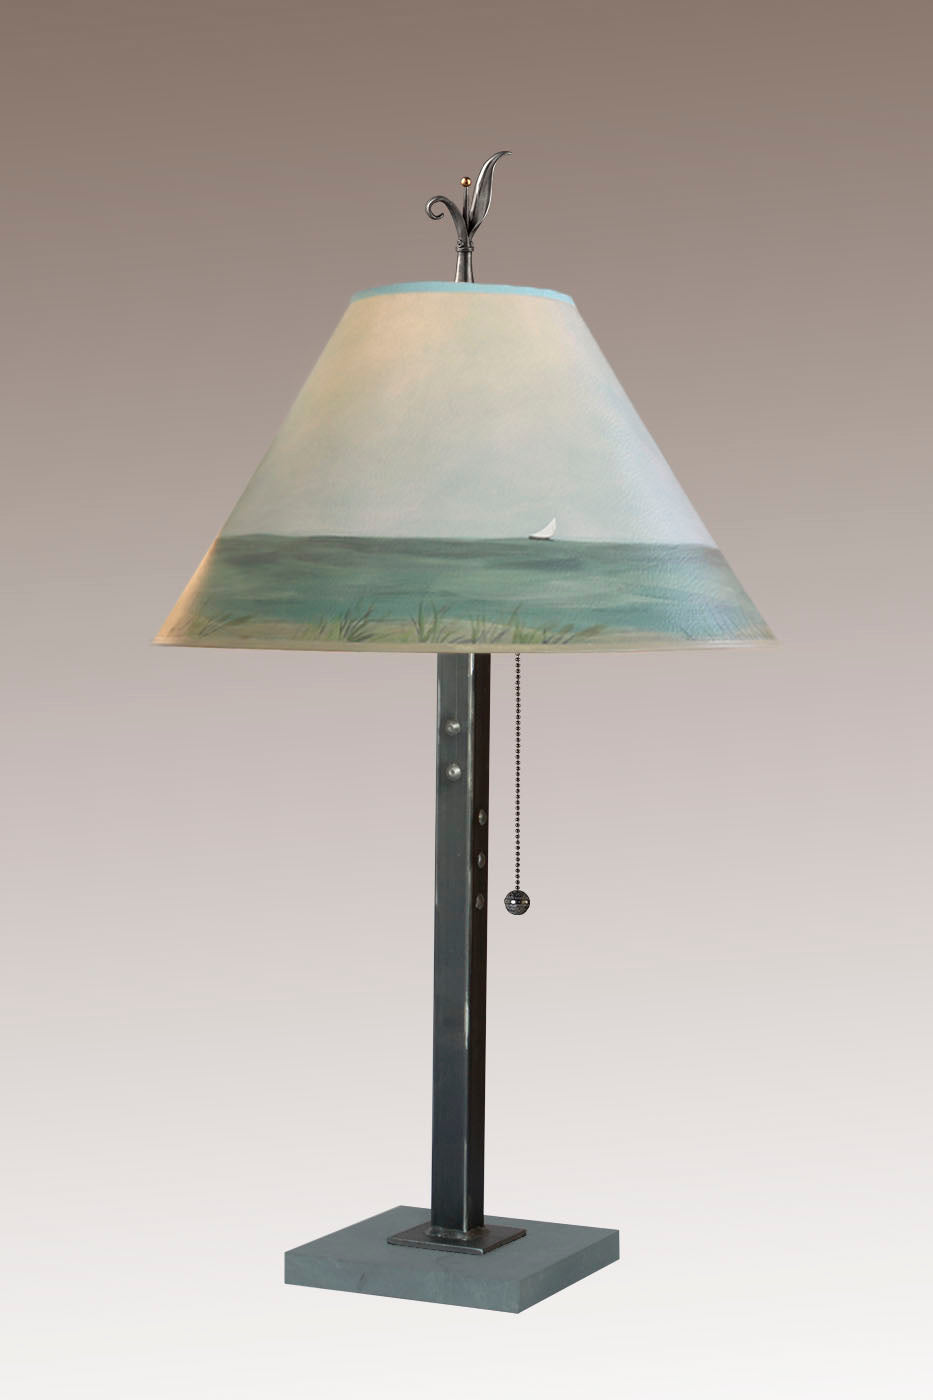 Janna Ugone & Co Table Lamps Steel Table Lamp with Medium Conical Shade in Shore